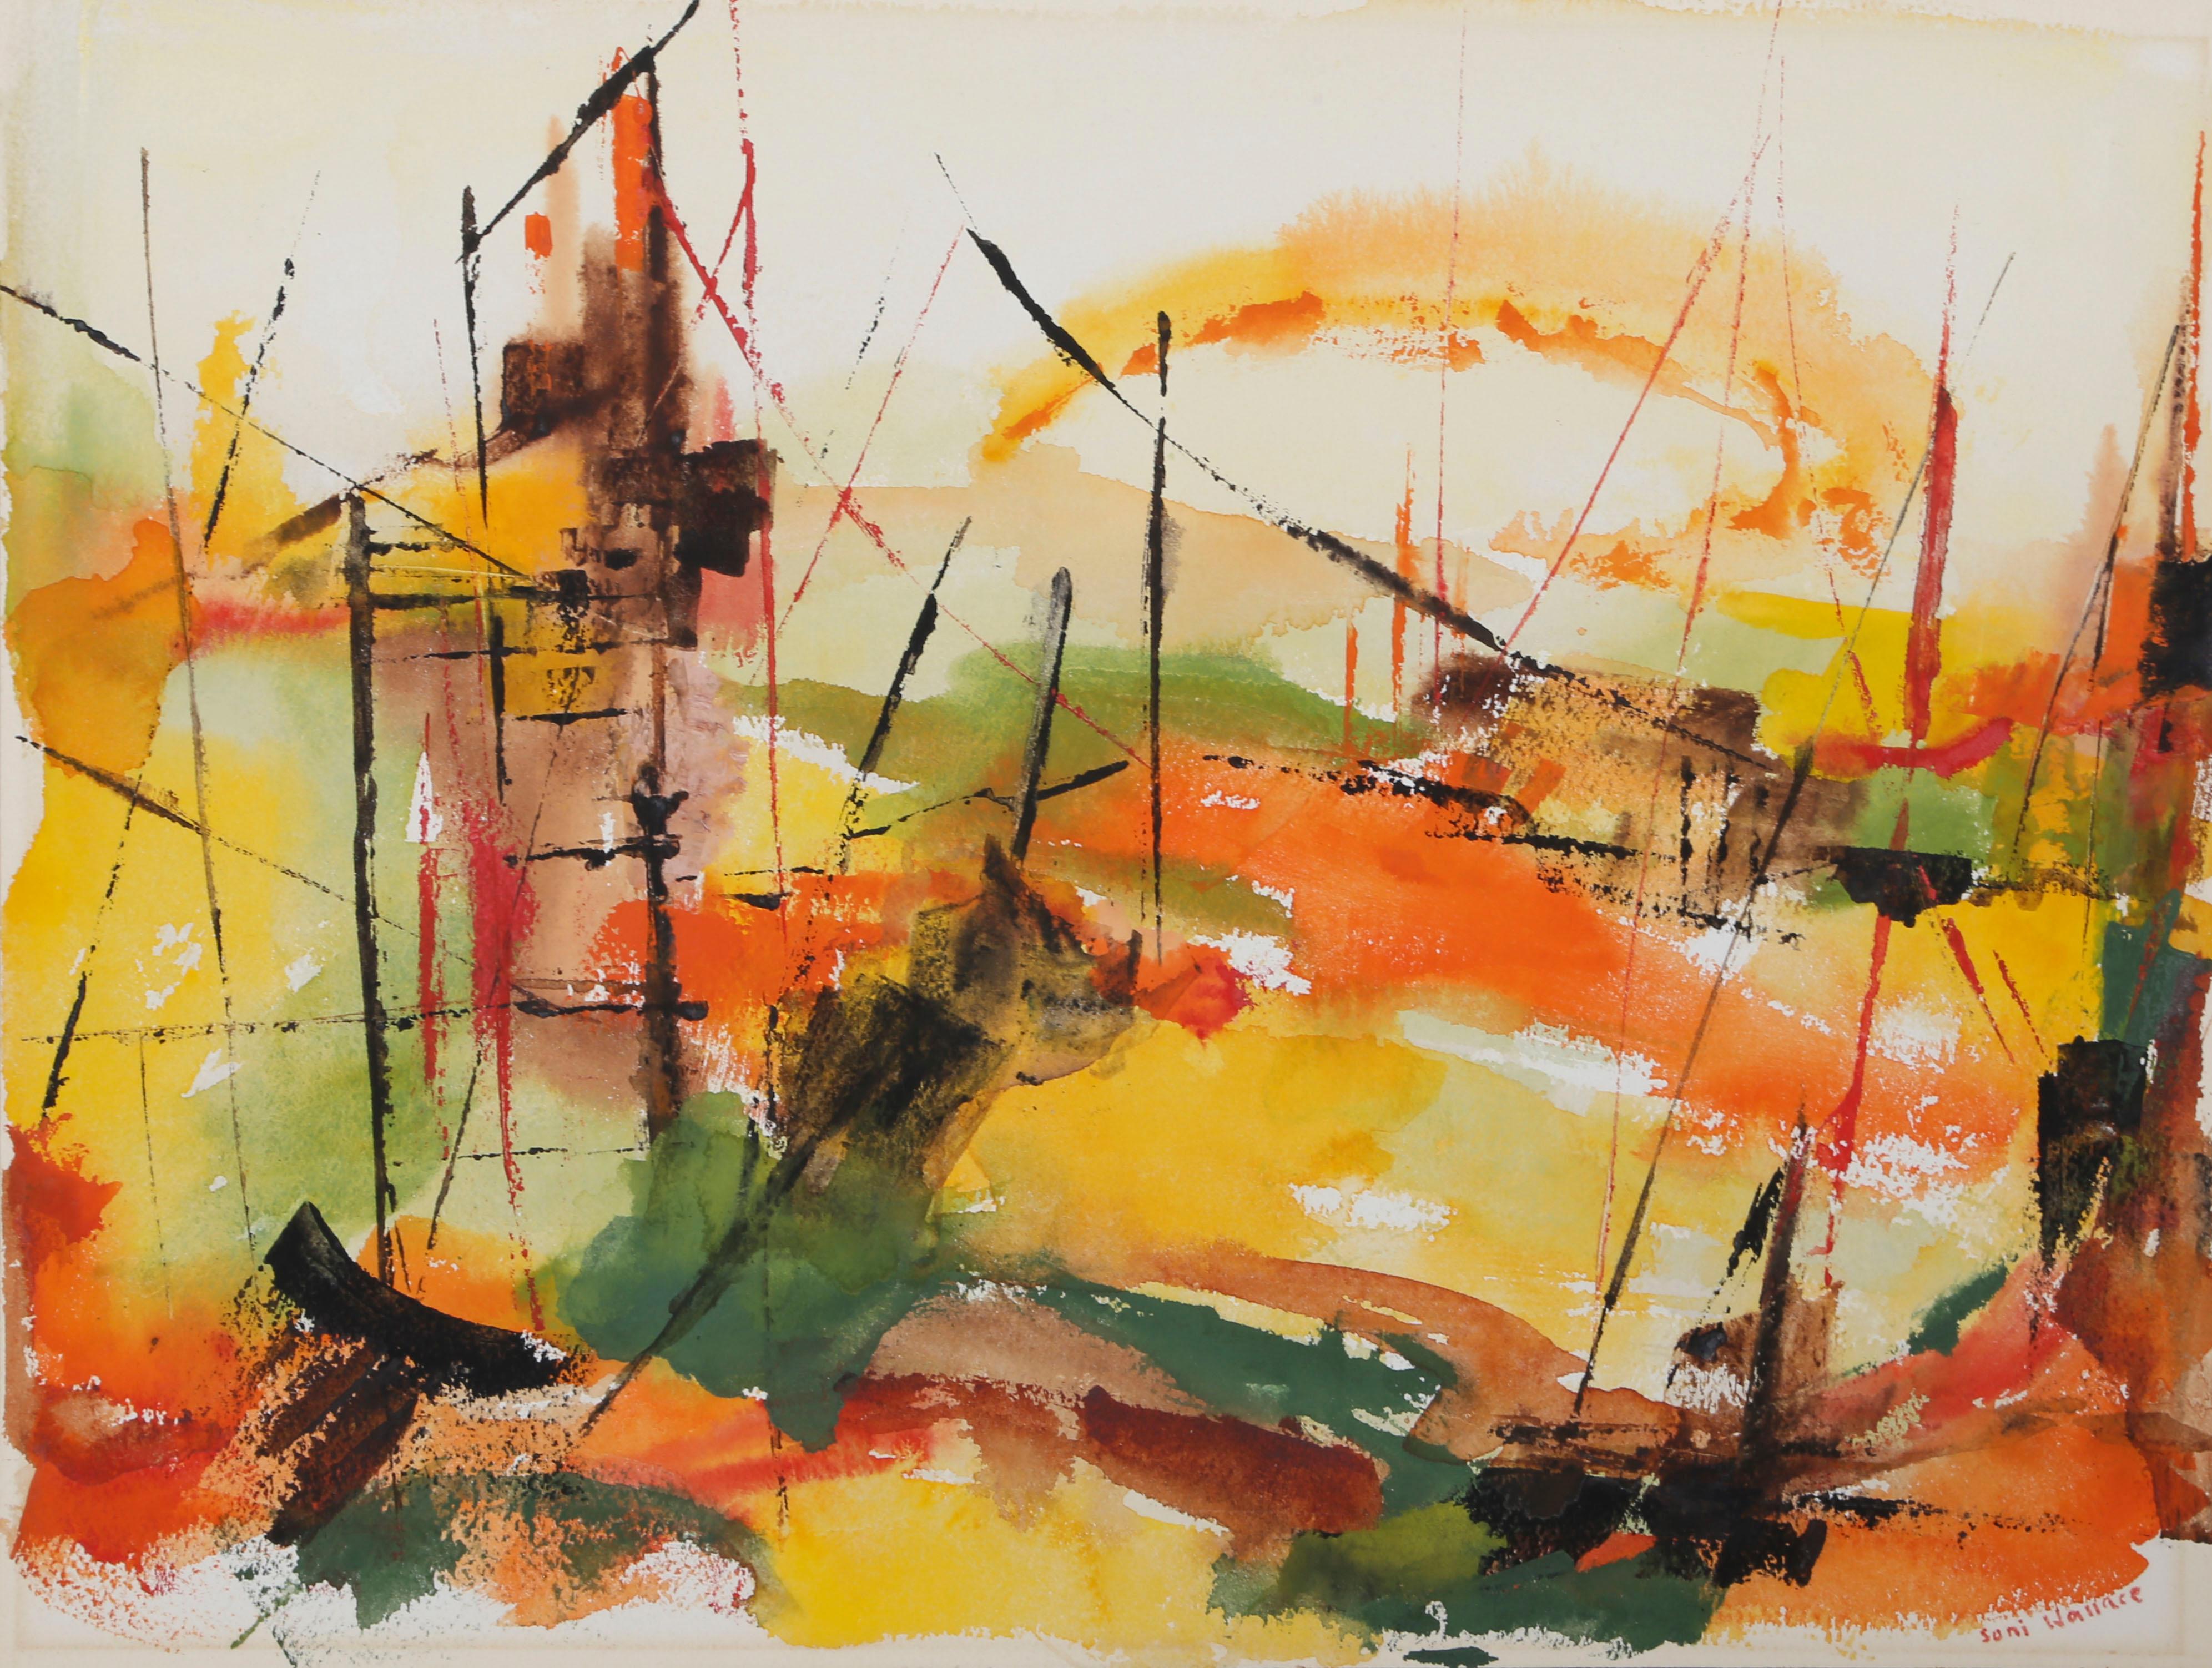 Artist: Soni Wallace
Title: Untitled - Abstract City
Year: circa 1962
Medium: Watercolor, signed 
Size: 12 x 16 in. (30.48 x 40.64 cm)